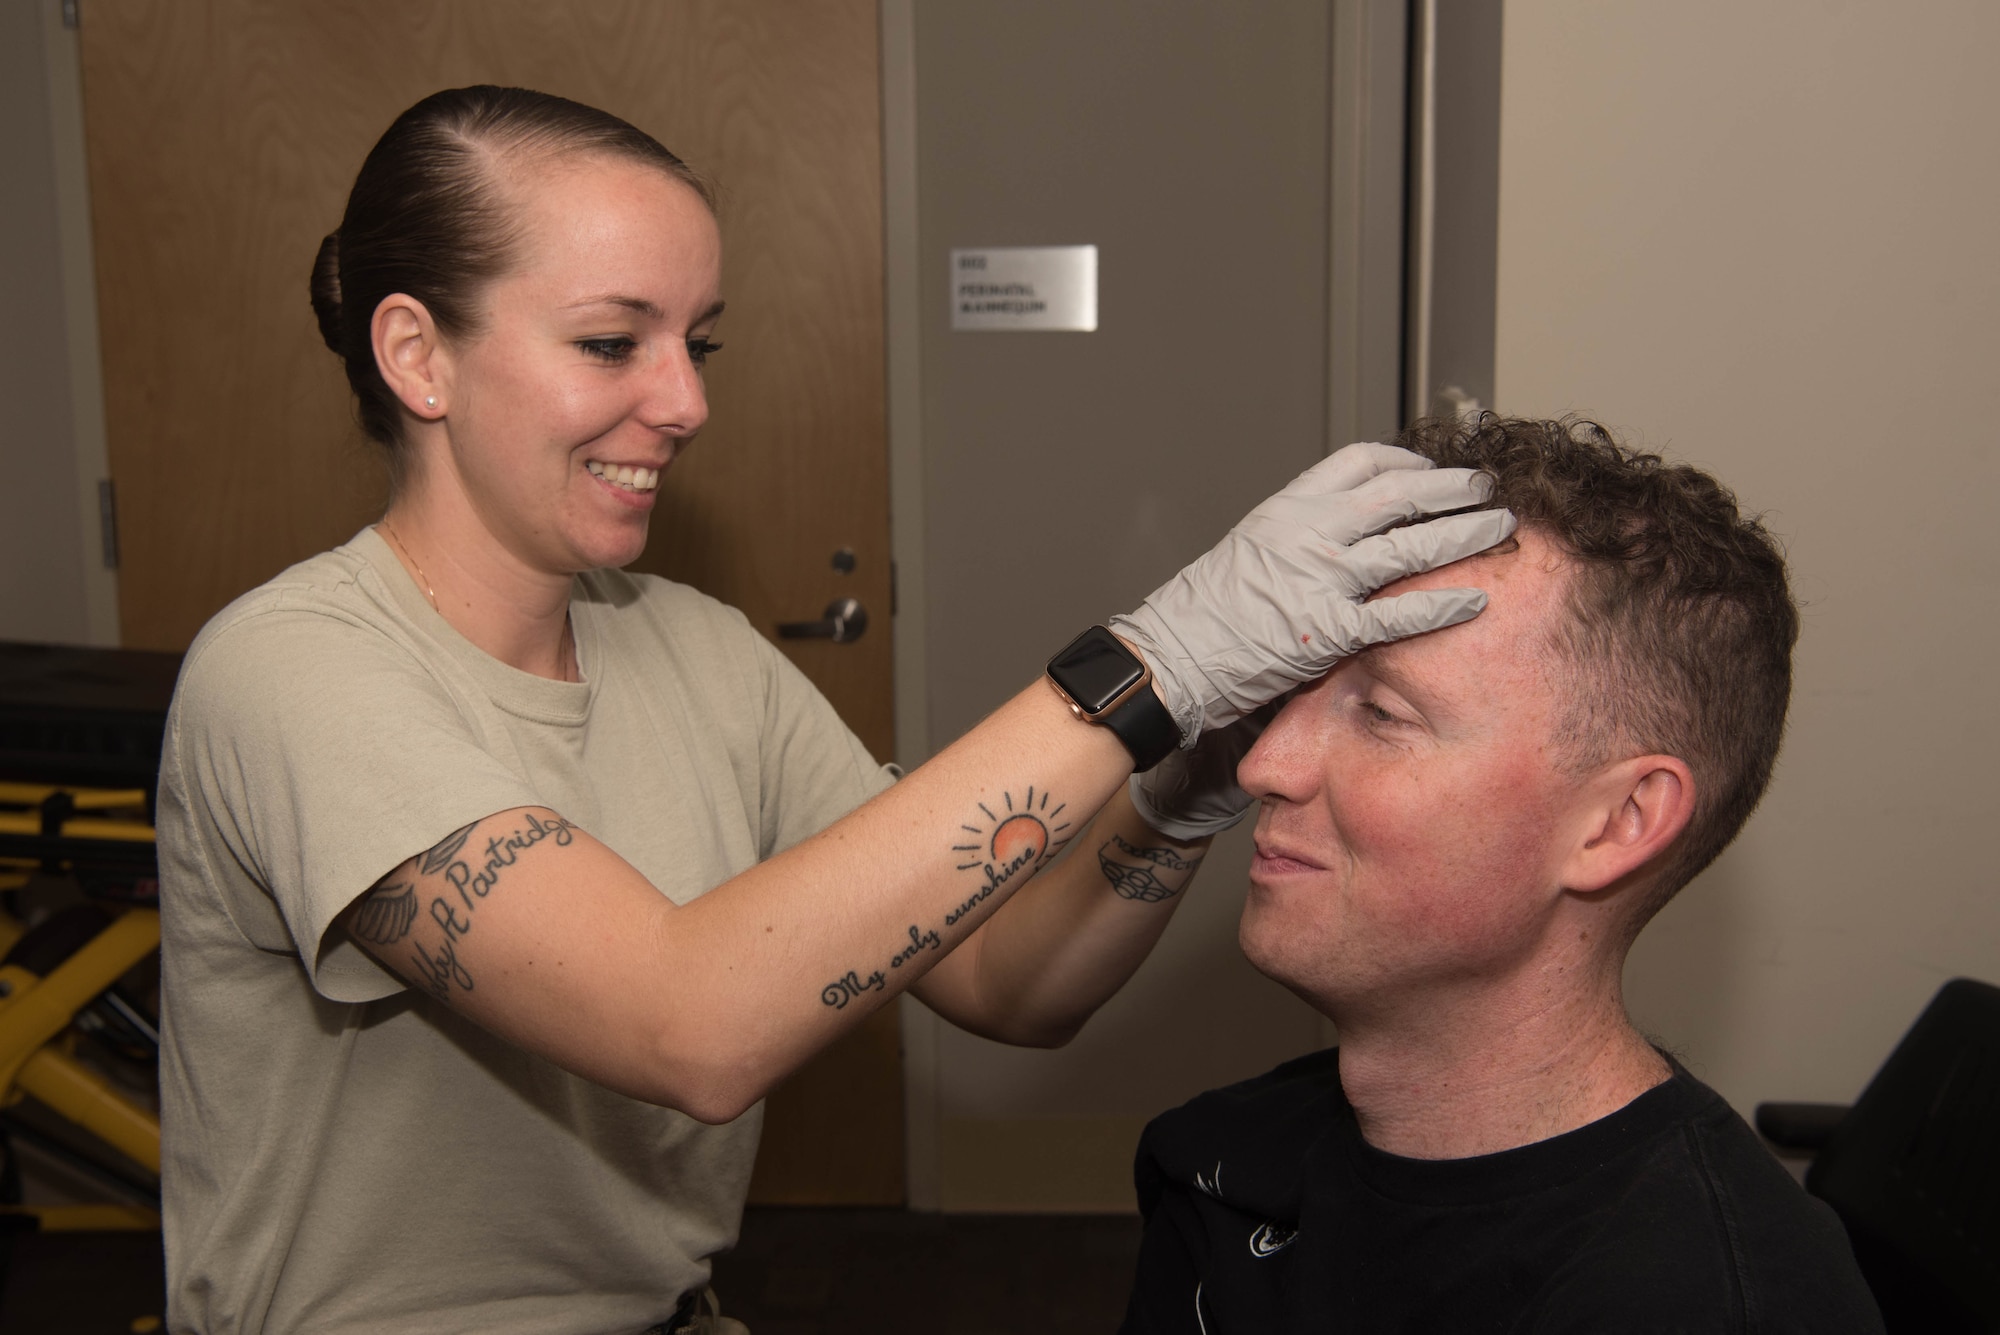 U.S. Air Force Staff Sgt. Sierra Jones, 633d Impatient Operations Squadron medical technician, applies makeup to volunteer Senior Airman Charles Schwarz, 36th Intelligence Squadron geospatial intelligence analyst, on Joint Base Langley-Eustis, Virginia, May 17, 2019. Jones was just one member who was tasked with applying makeup to volunteers to simulate real life injuries. (U.S. Air Force photo by Airman 1st Class Marcus M. Bullock)